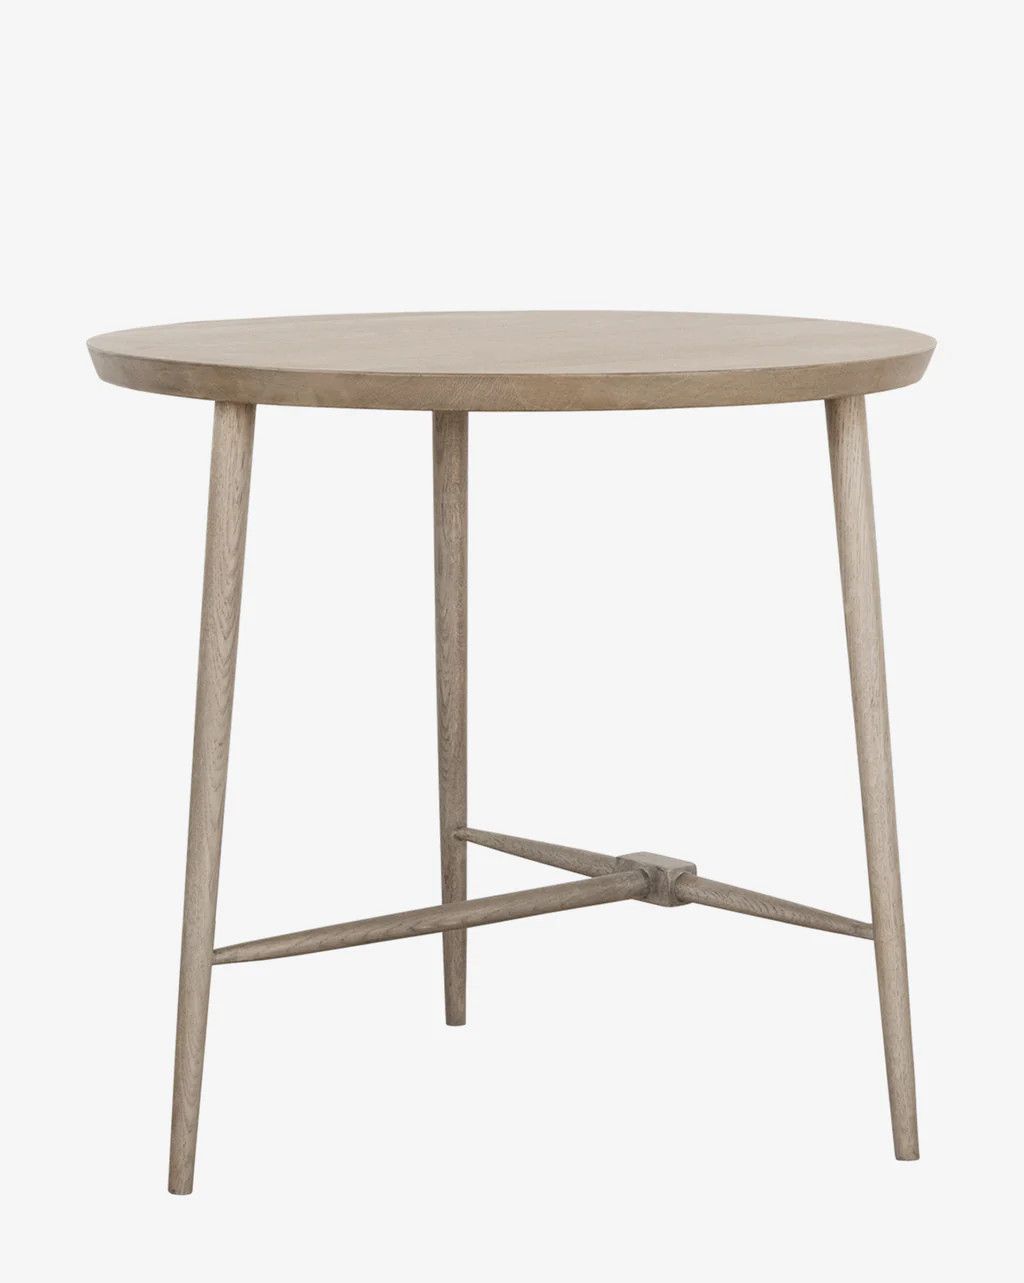 Tavin Side Table | McGee & Co.